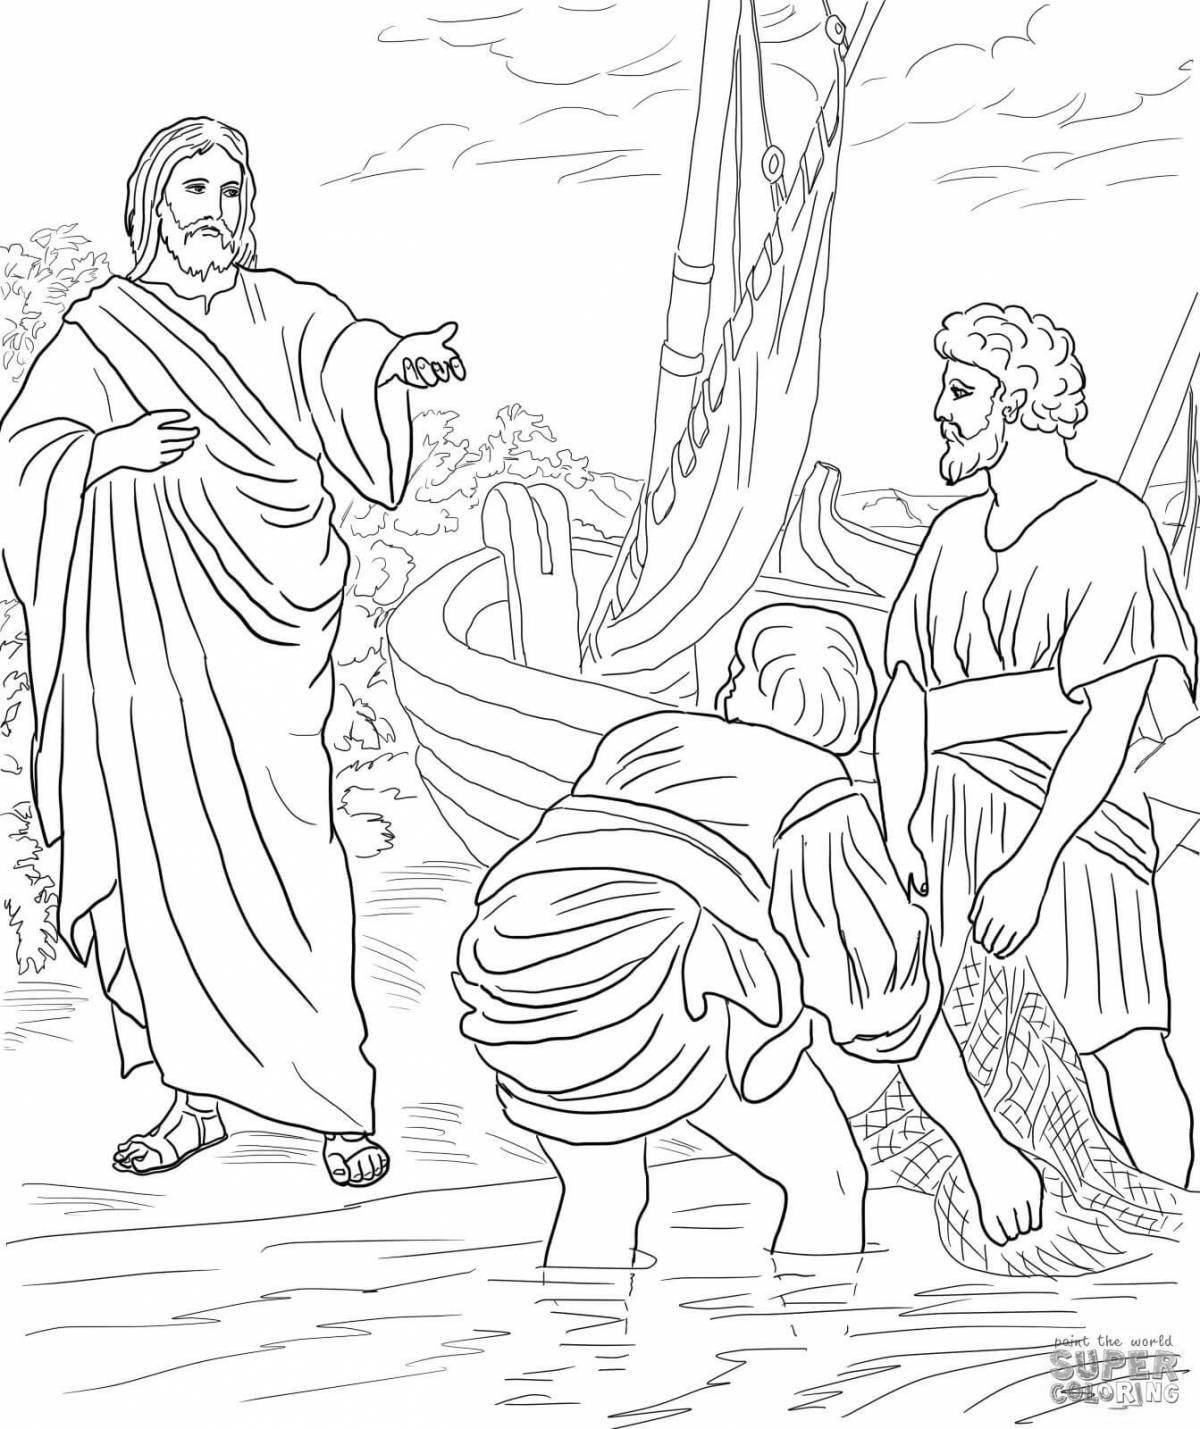 Great coloring book with biblical design